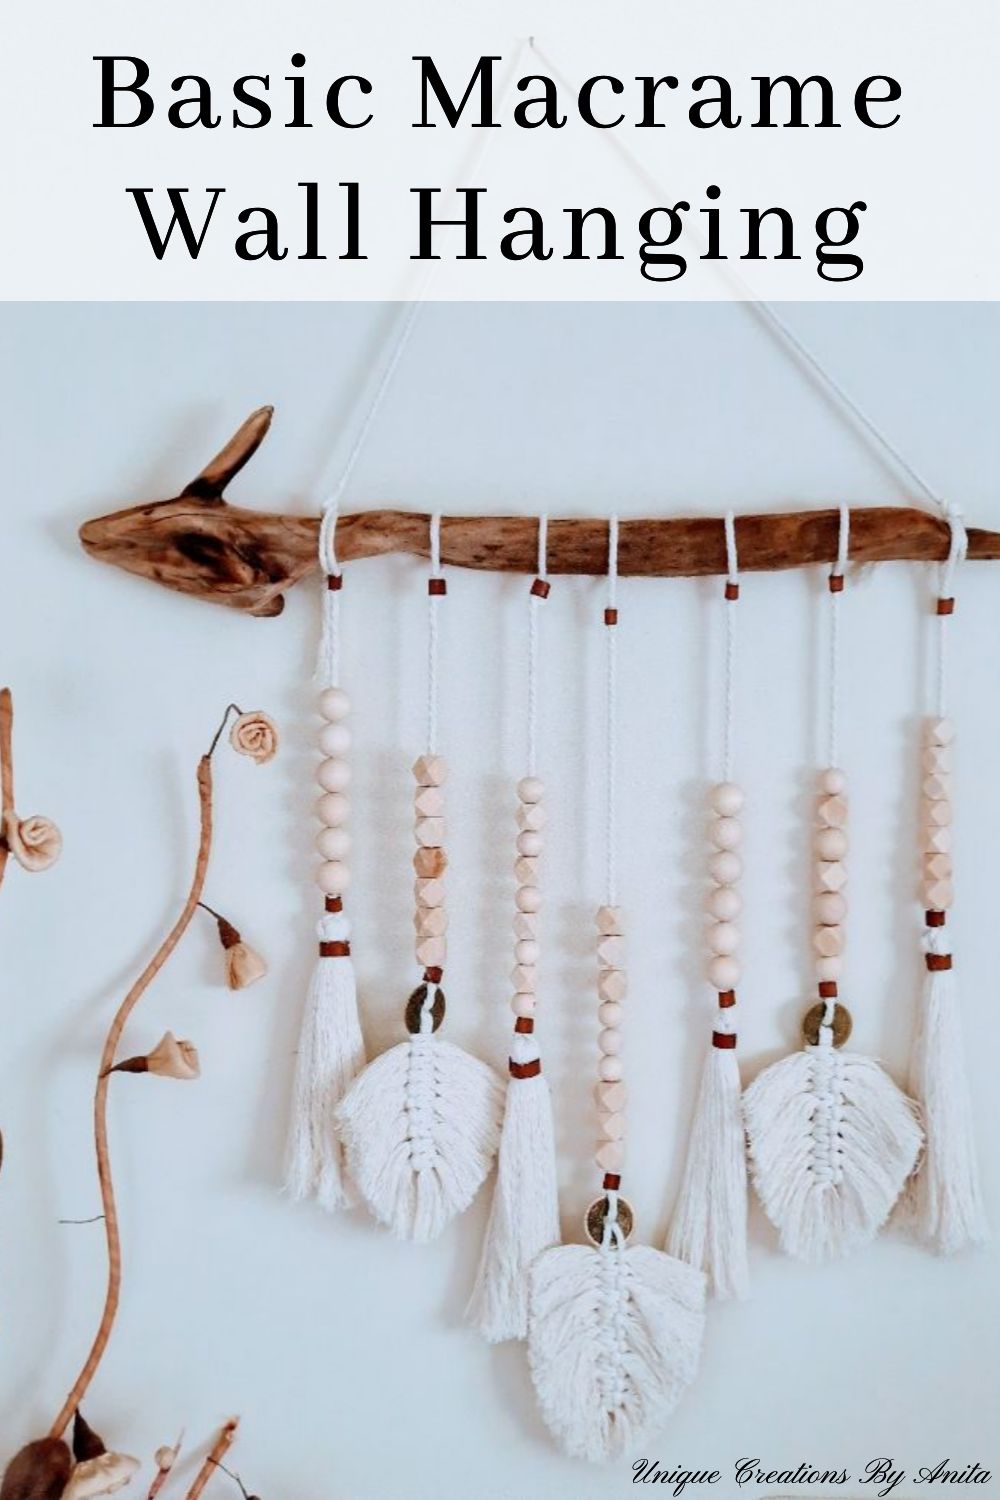 How to make a basic macreme wall hanging using wooden beads